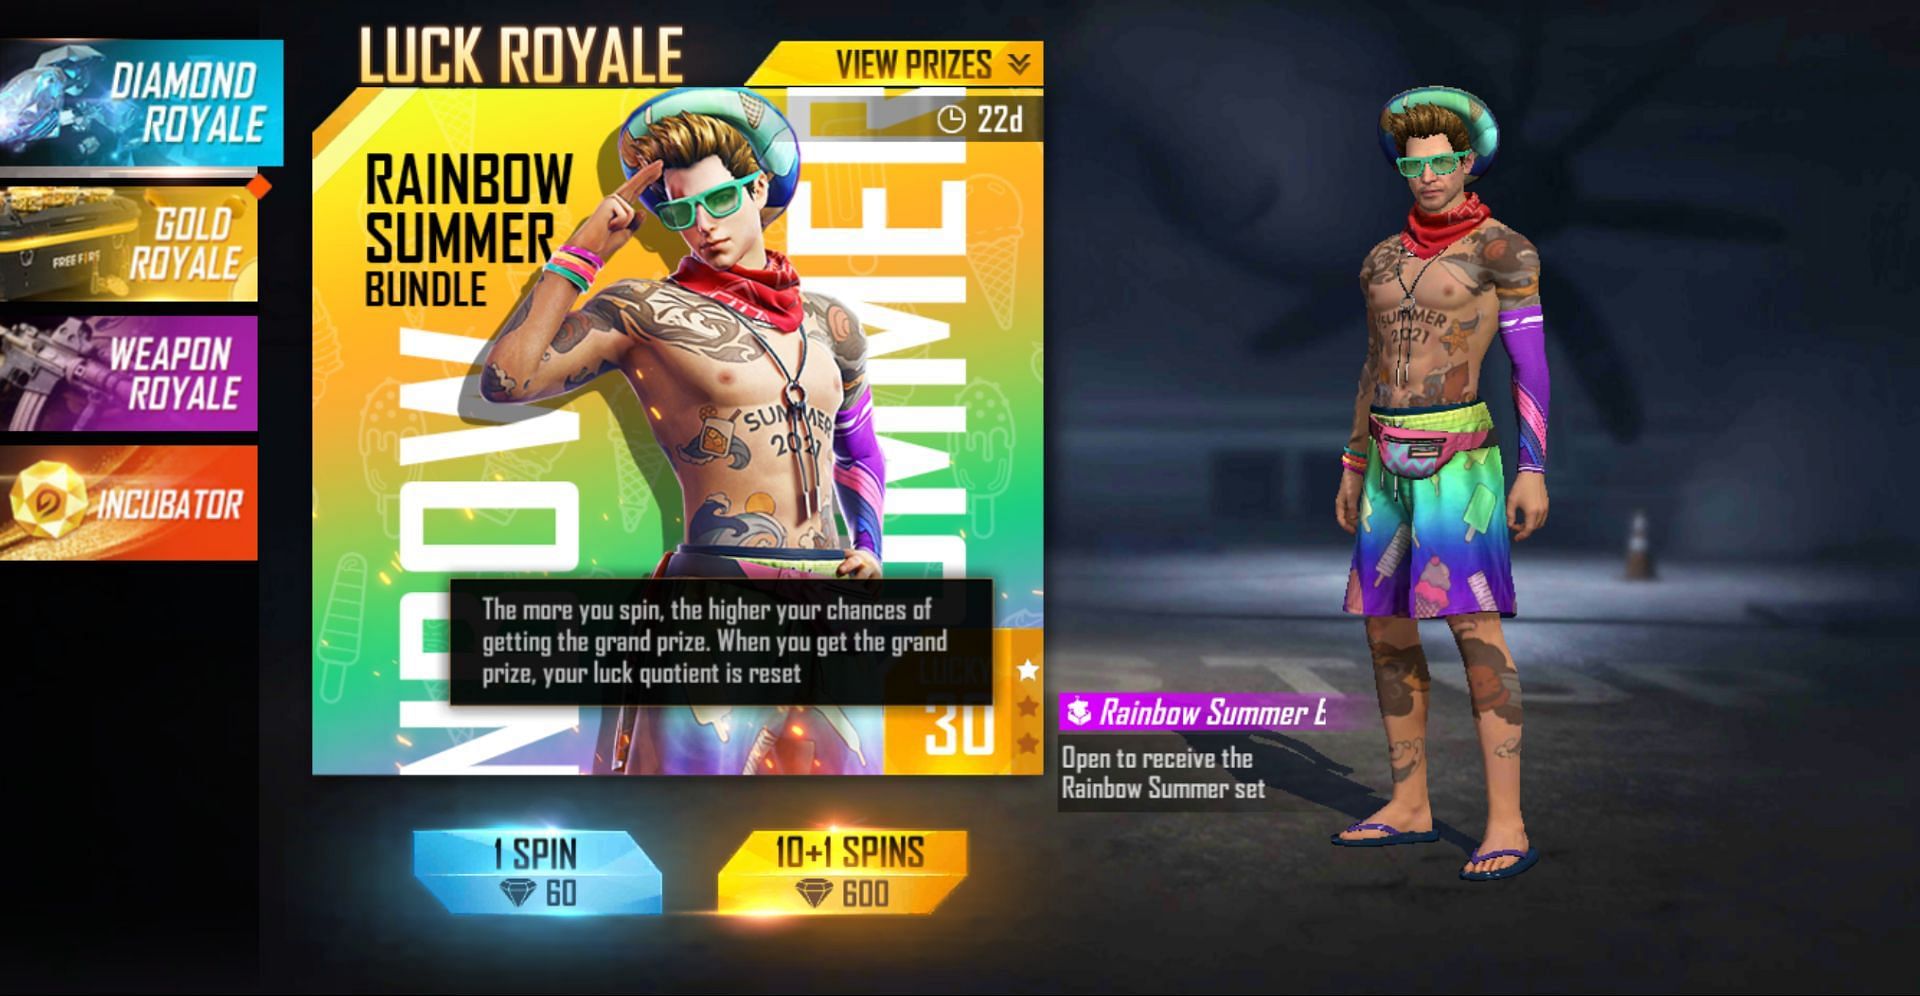 Diamond Royale will run for 22 days and features a wide range of rewards (Image via Garena)